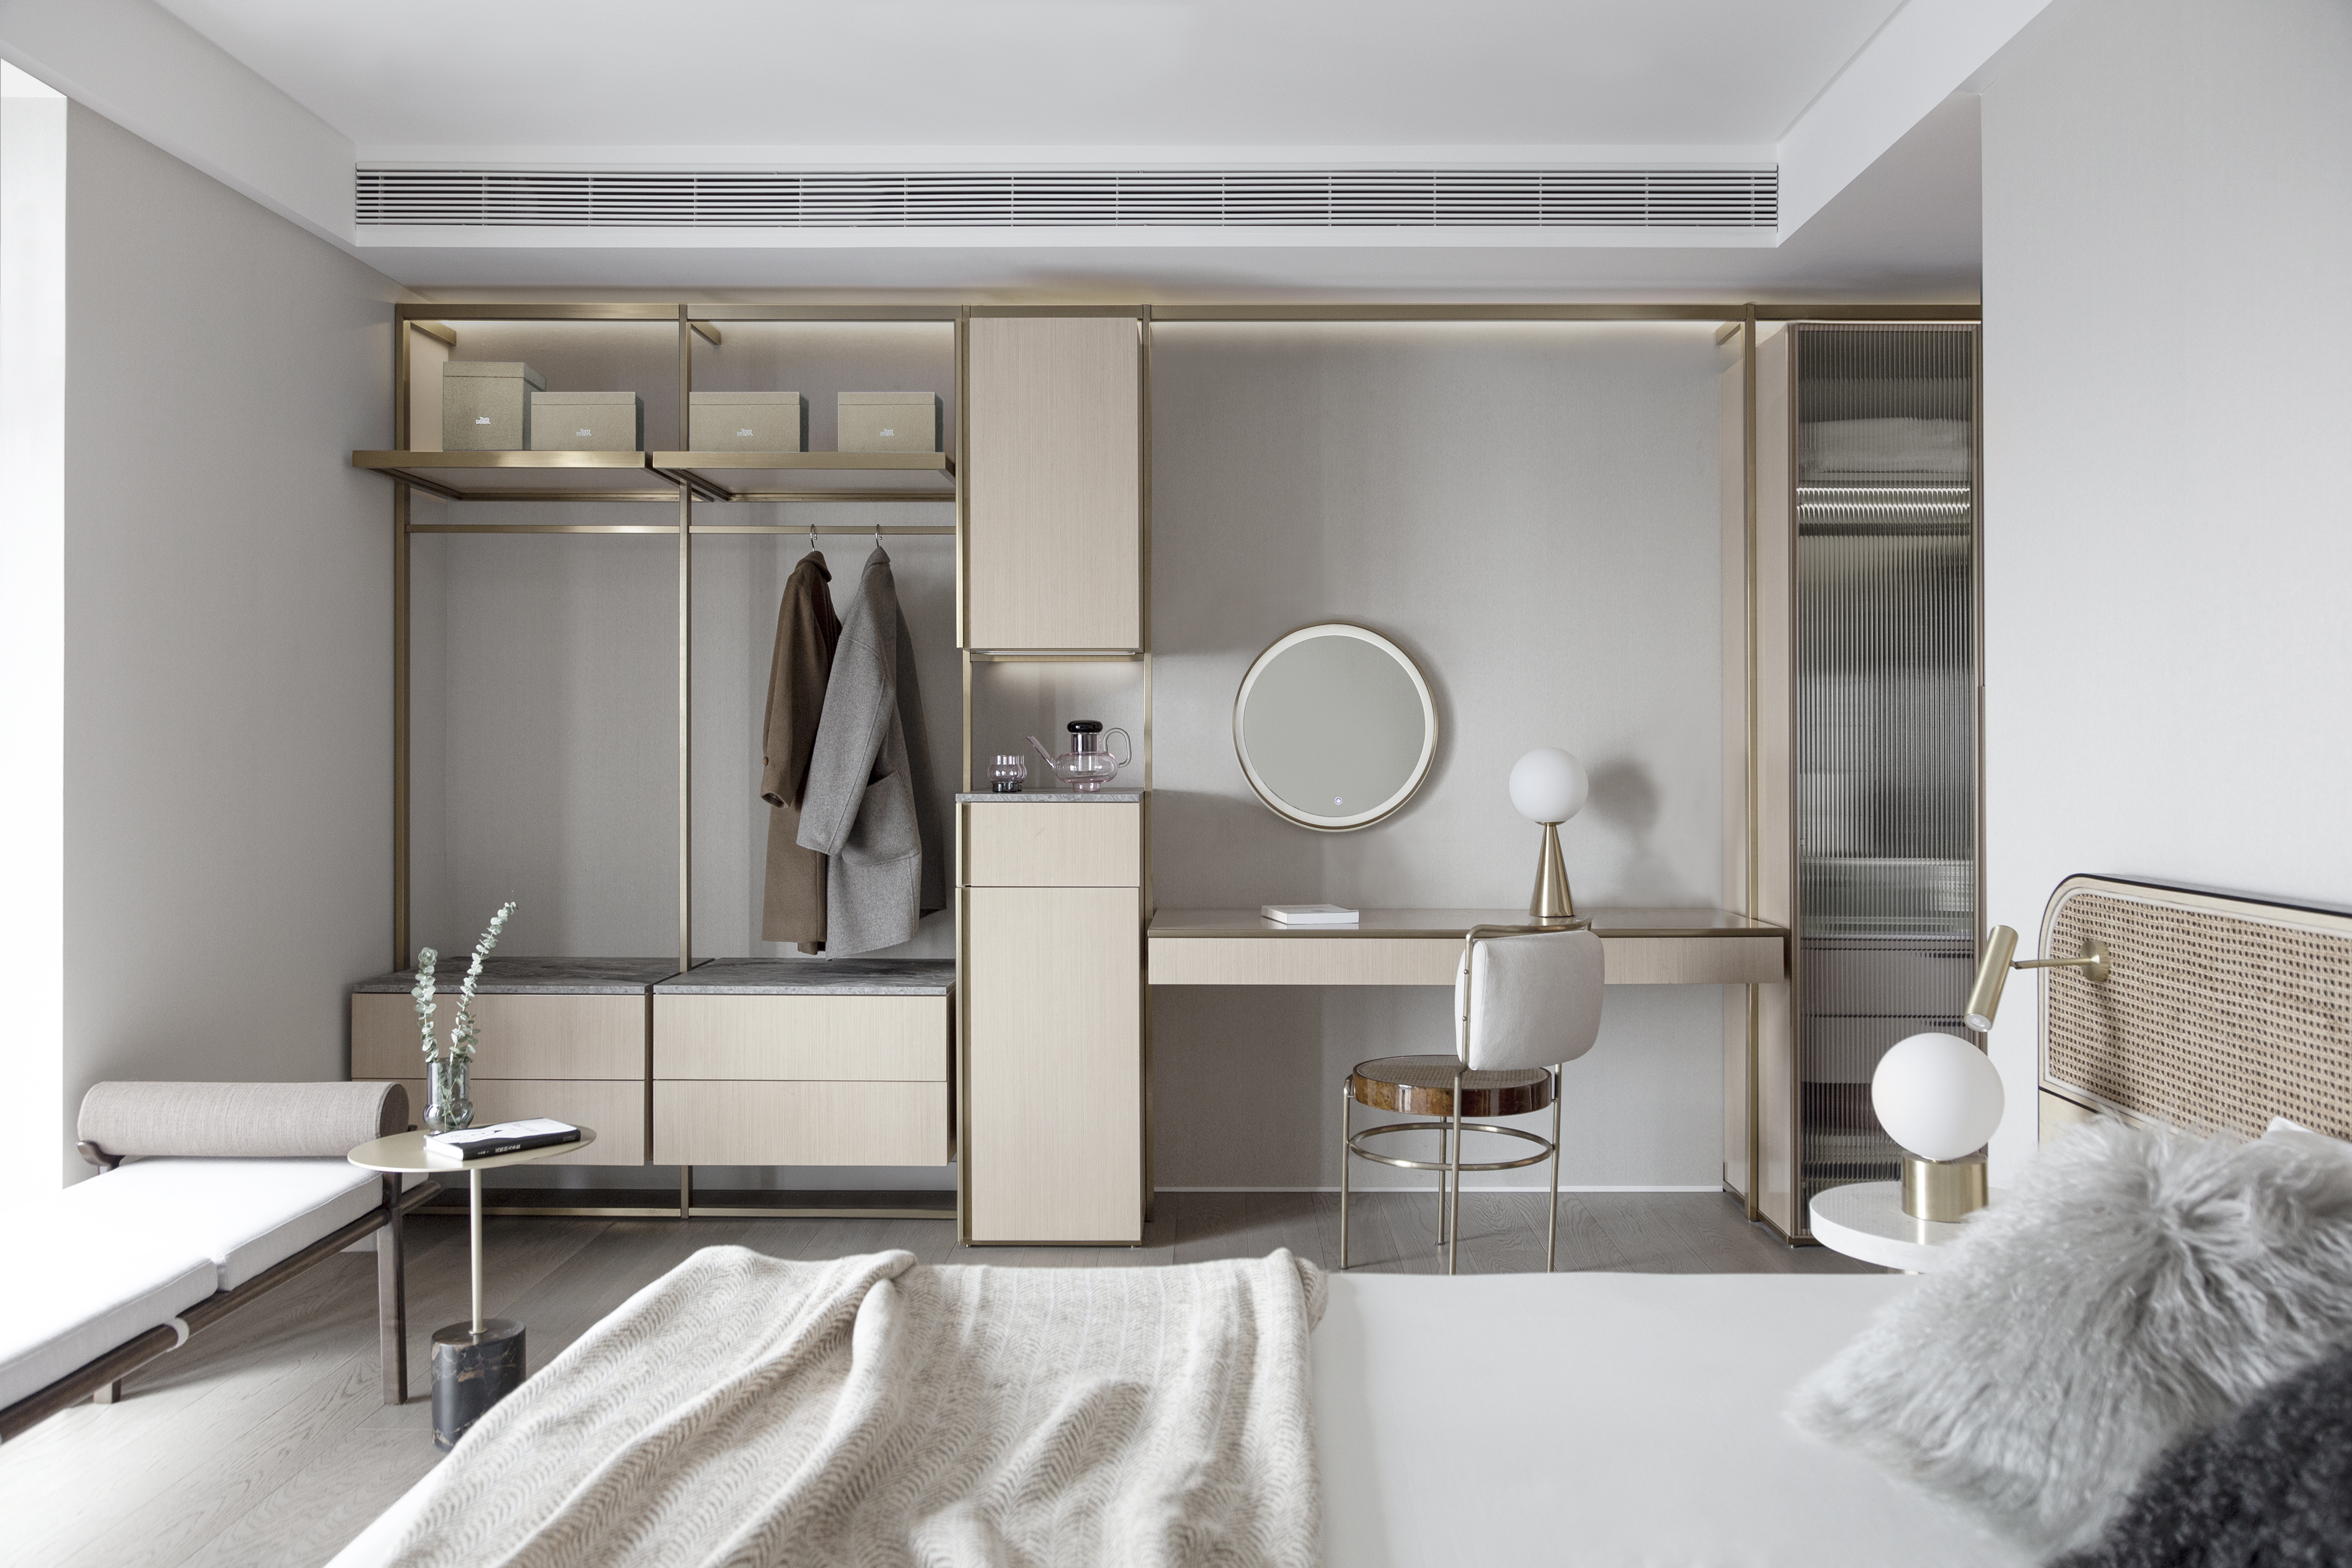 The pursuit of happiness reflected in the luxury apartment by Muxin Studio - Bedrooms